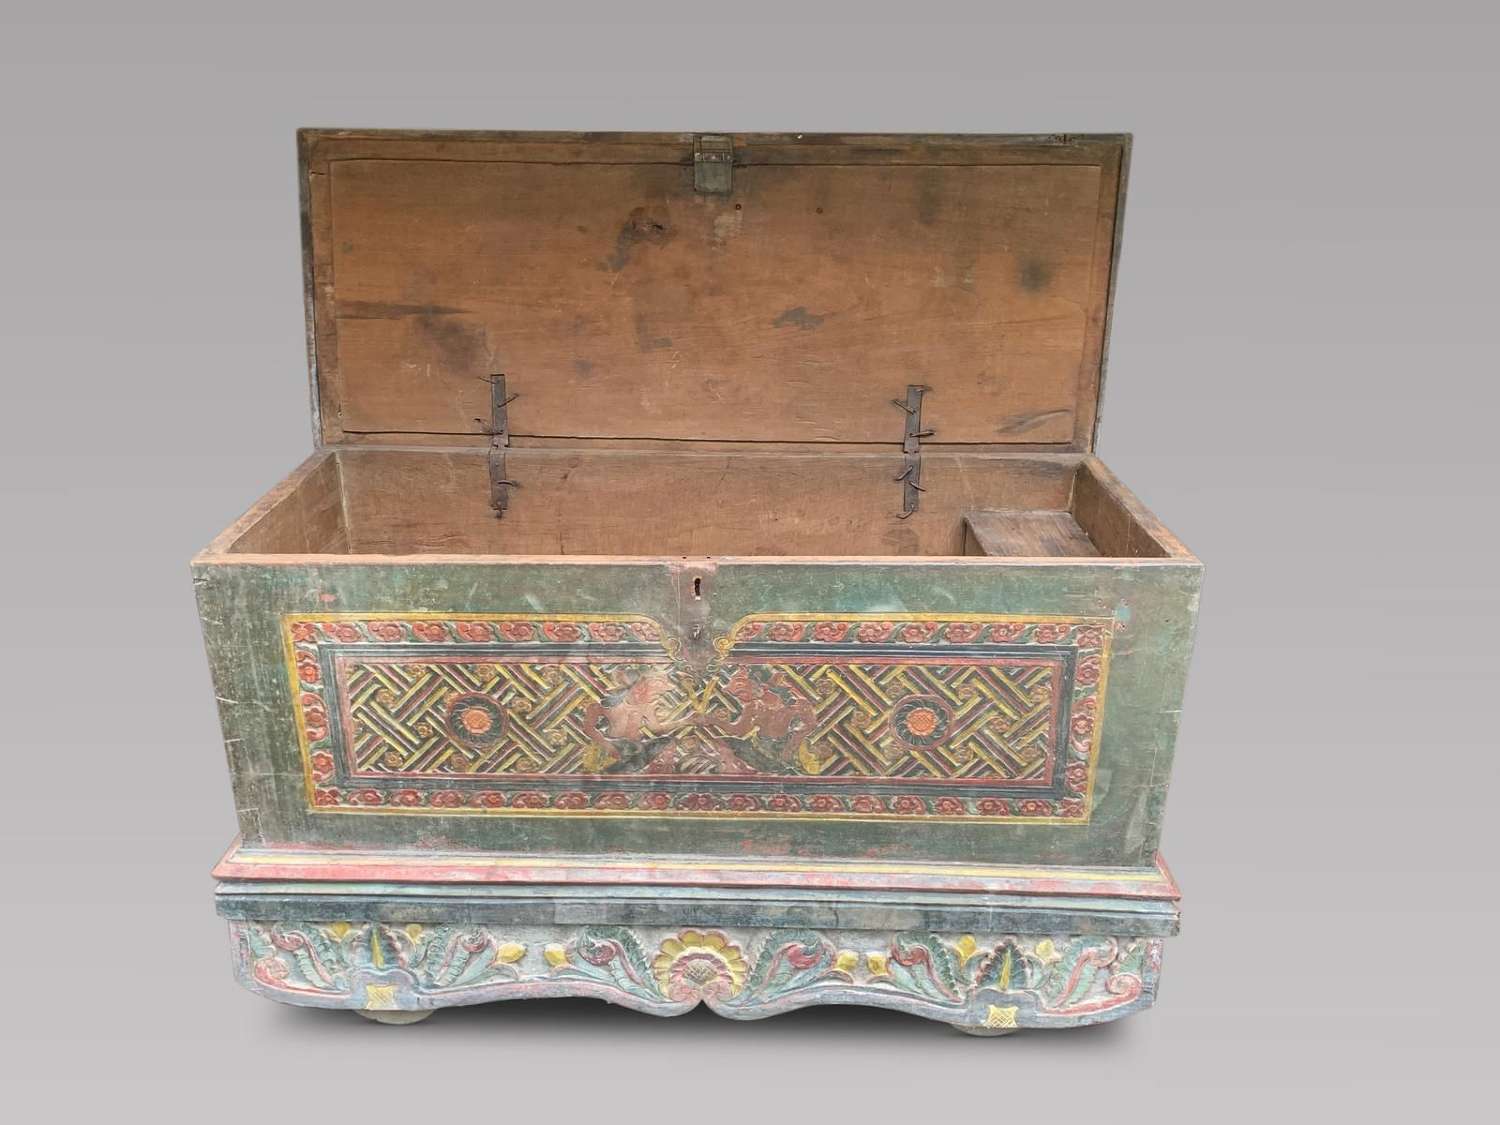 Fabulous 19th Century Swedish Wooden Dowry / Marriage Chest